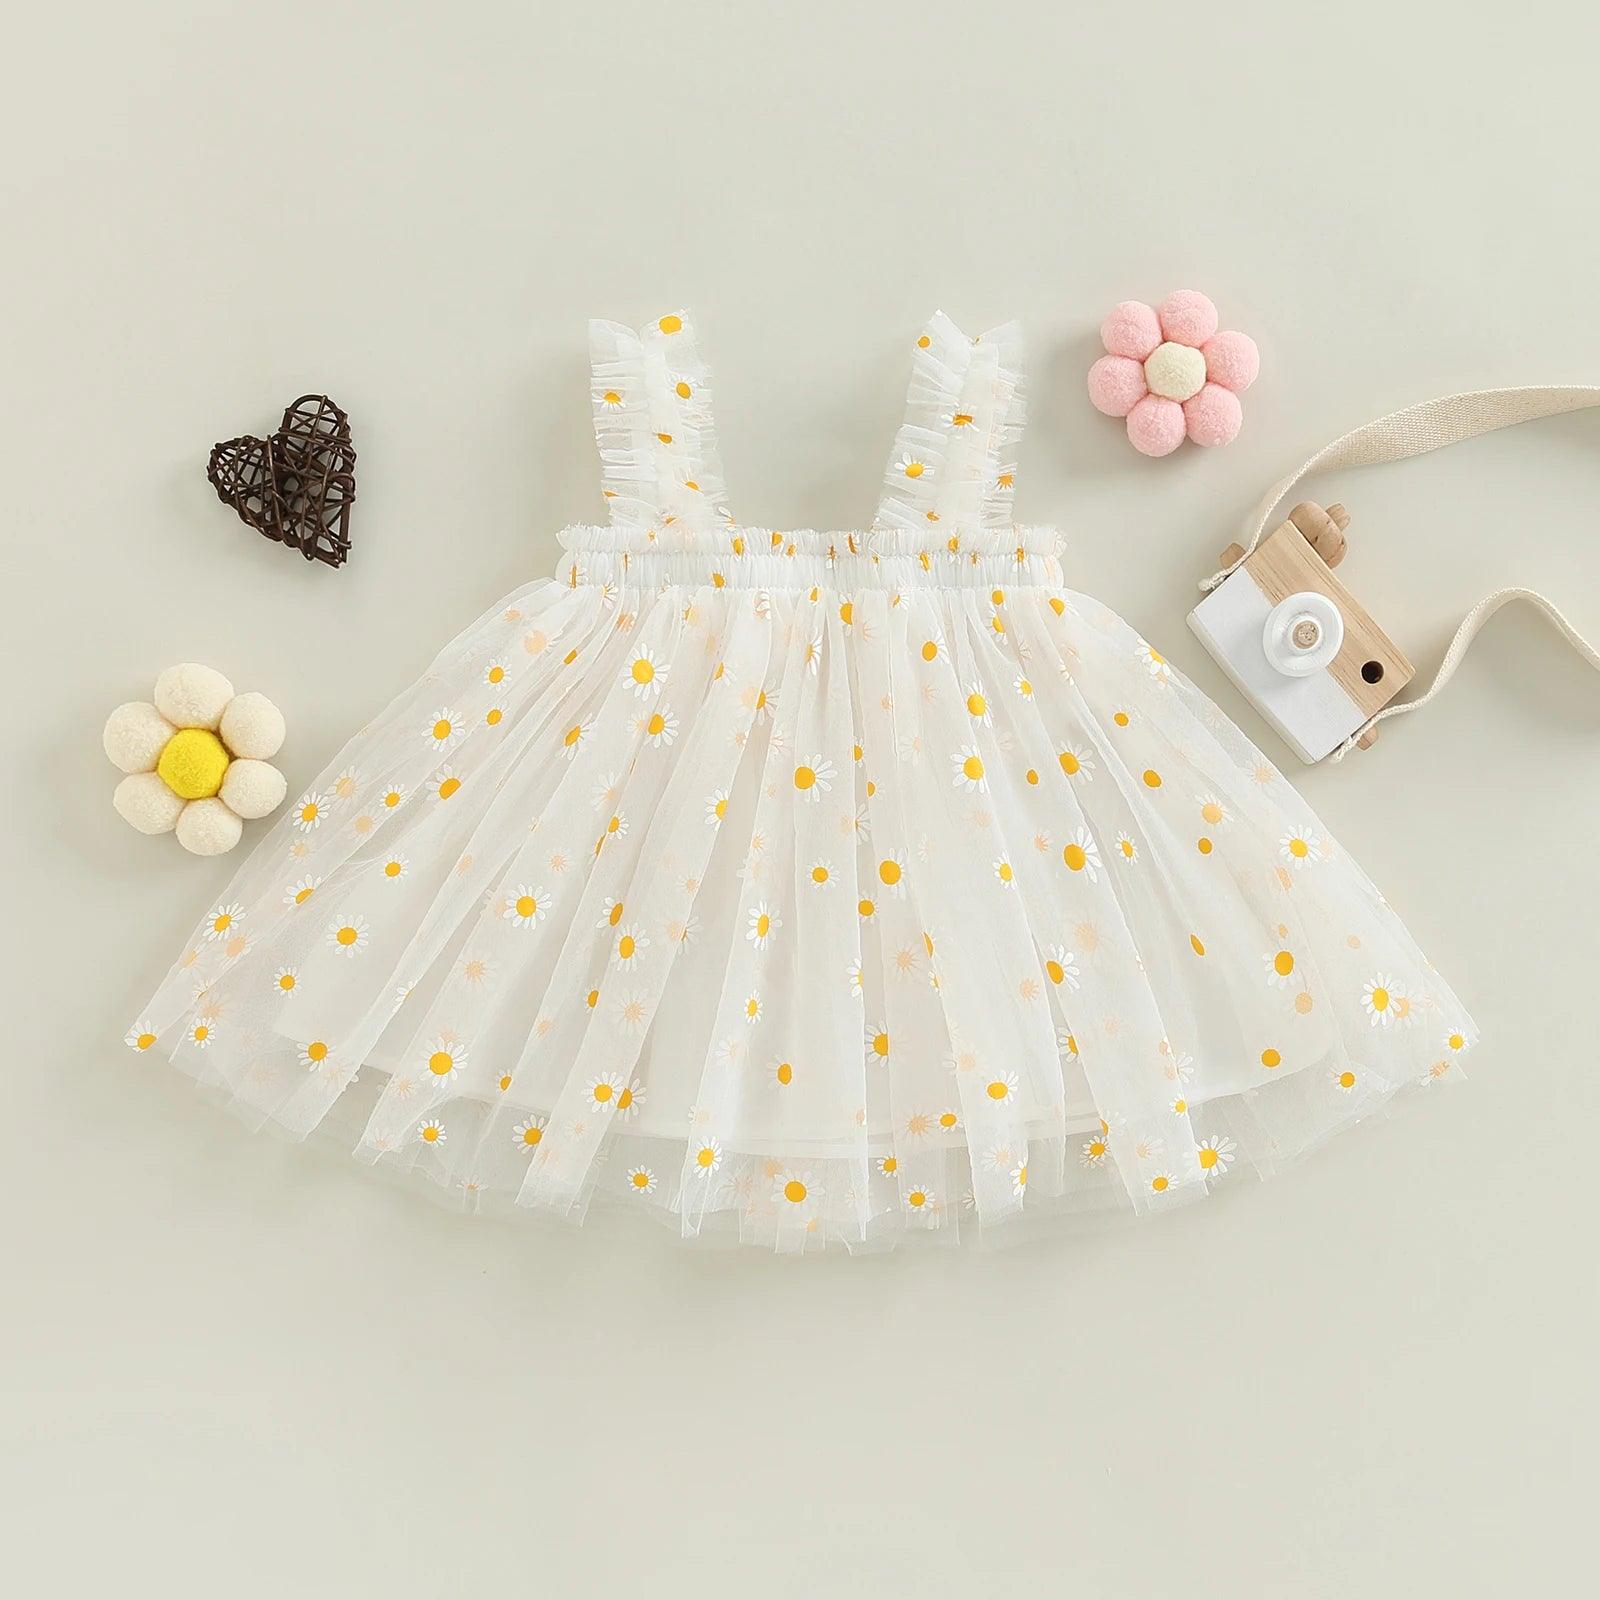 Ma&Baby Daisy Tulle Dress for Girls - Summer Party Beach Holiday Clothing  ourlum.com   